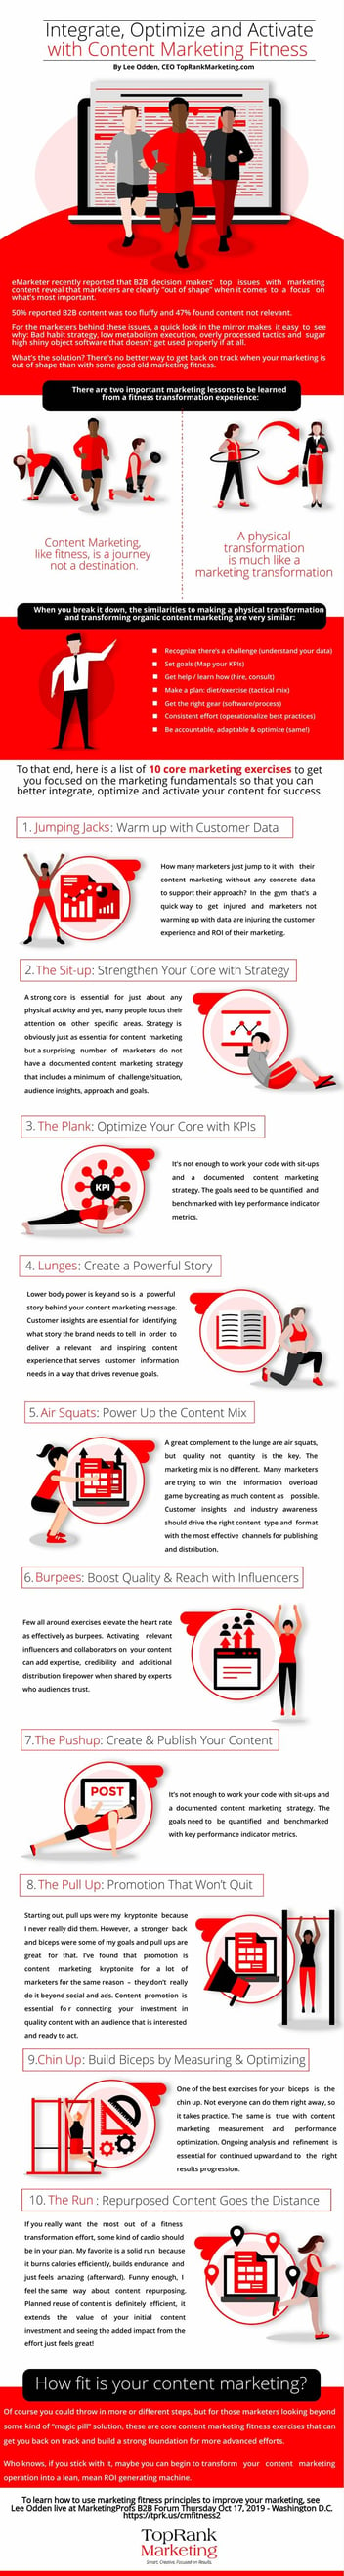 190806-infographic-Content-Marketing-Fitness-TopRank